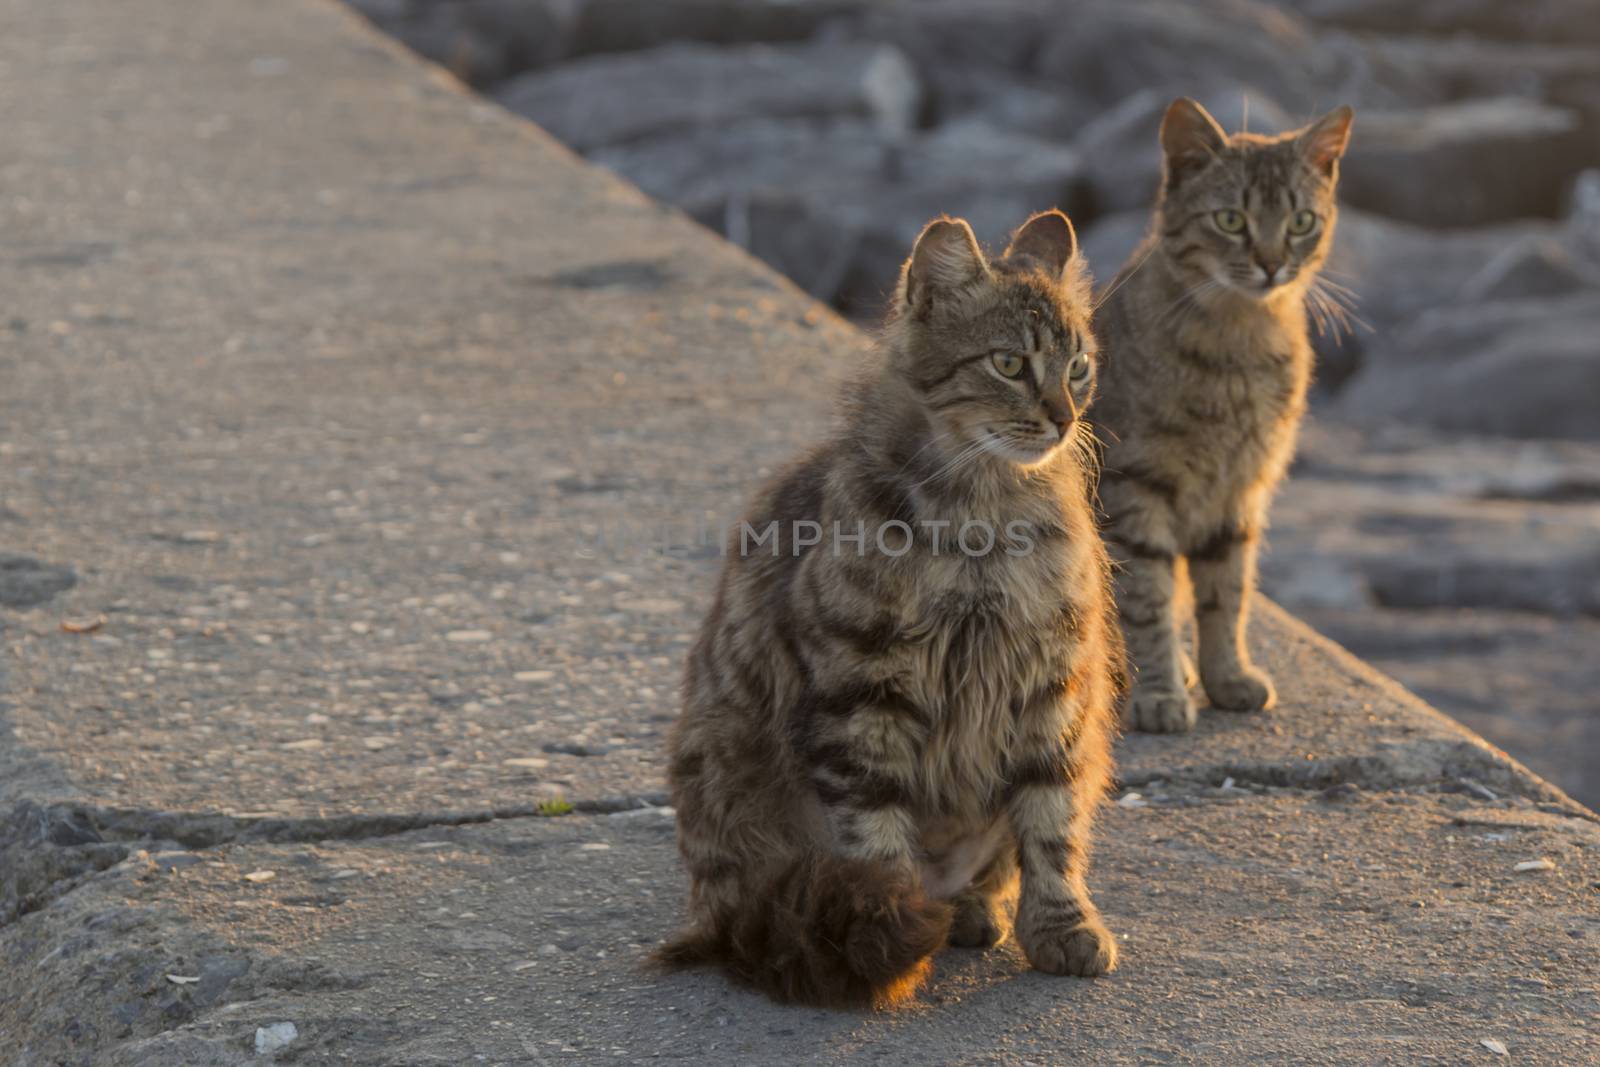 our lovely friends in nature are cats by yilmazsavaskandag